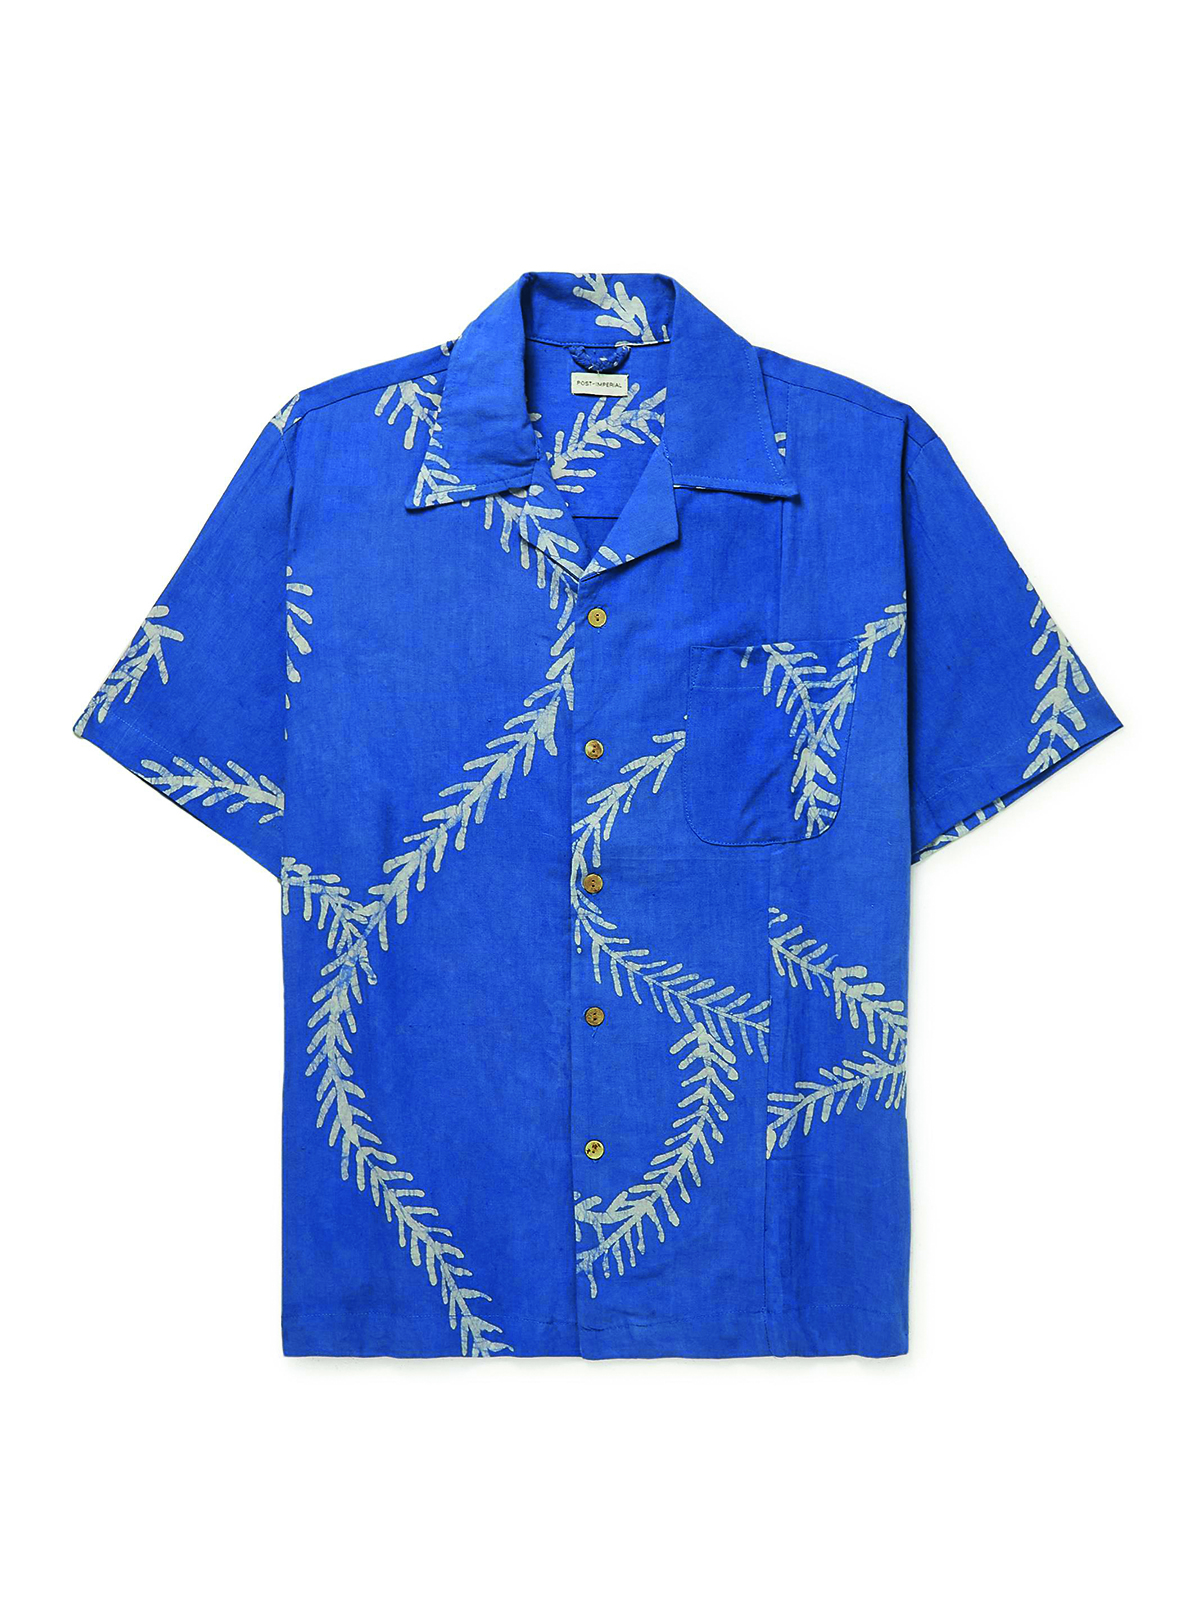 blue shirt with a white pattern